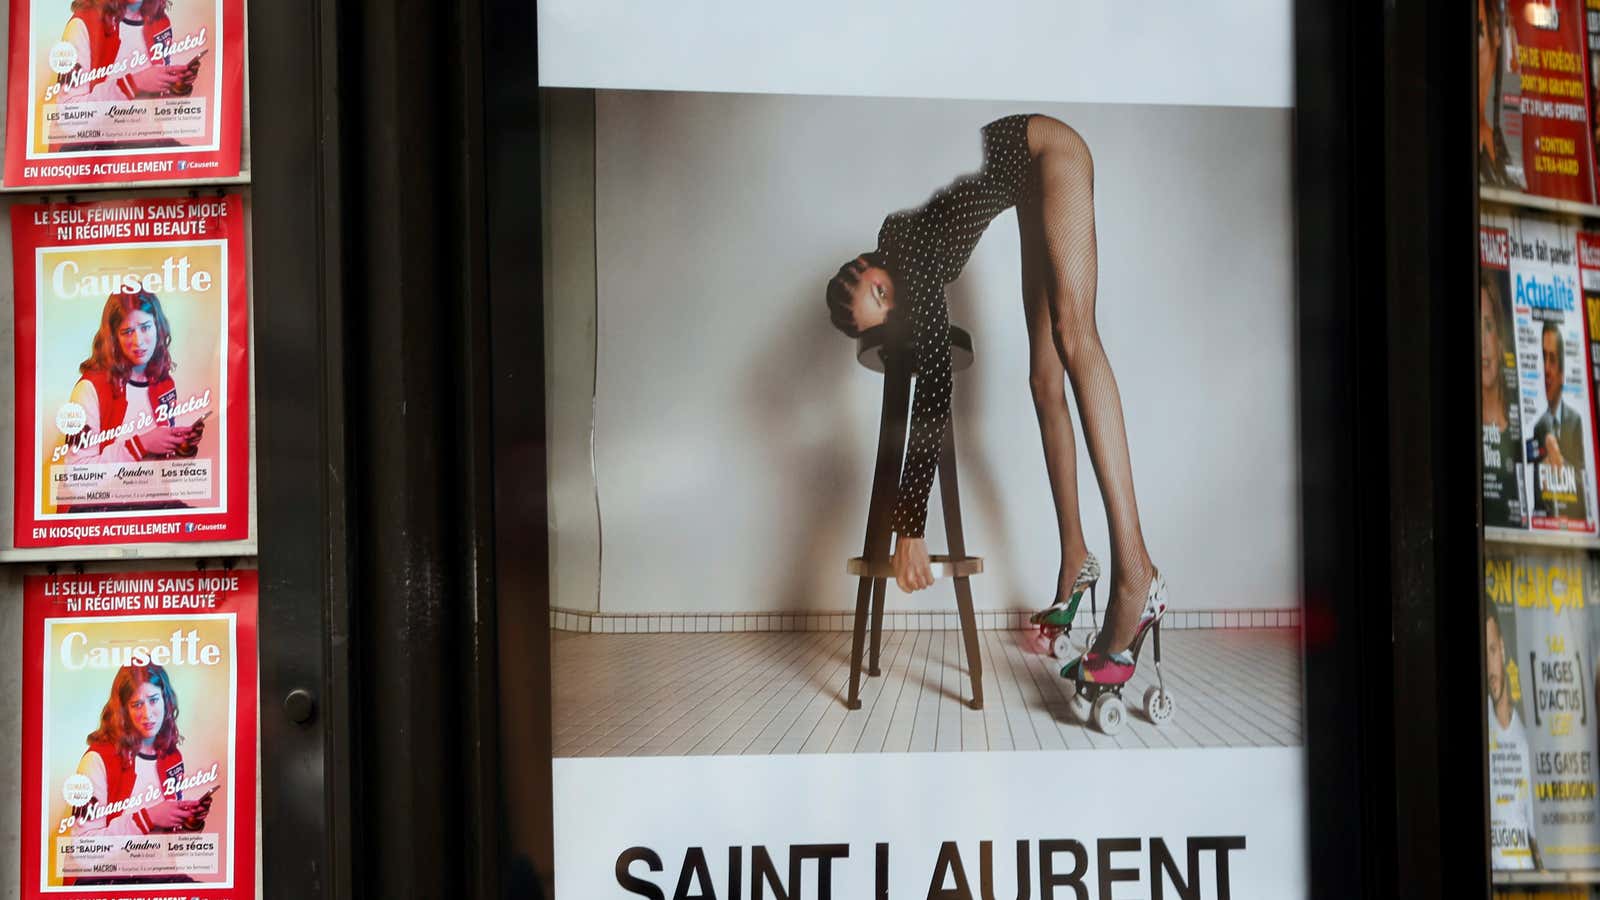 An ad by Saint Laurent at a newspaper kiosk in Paris.